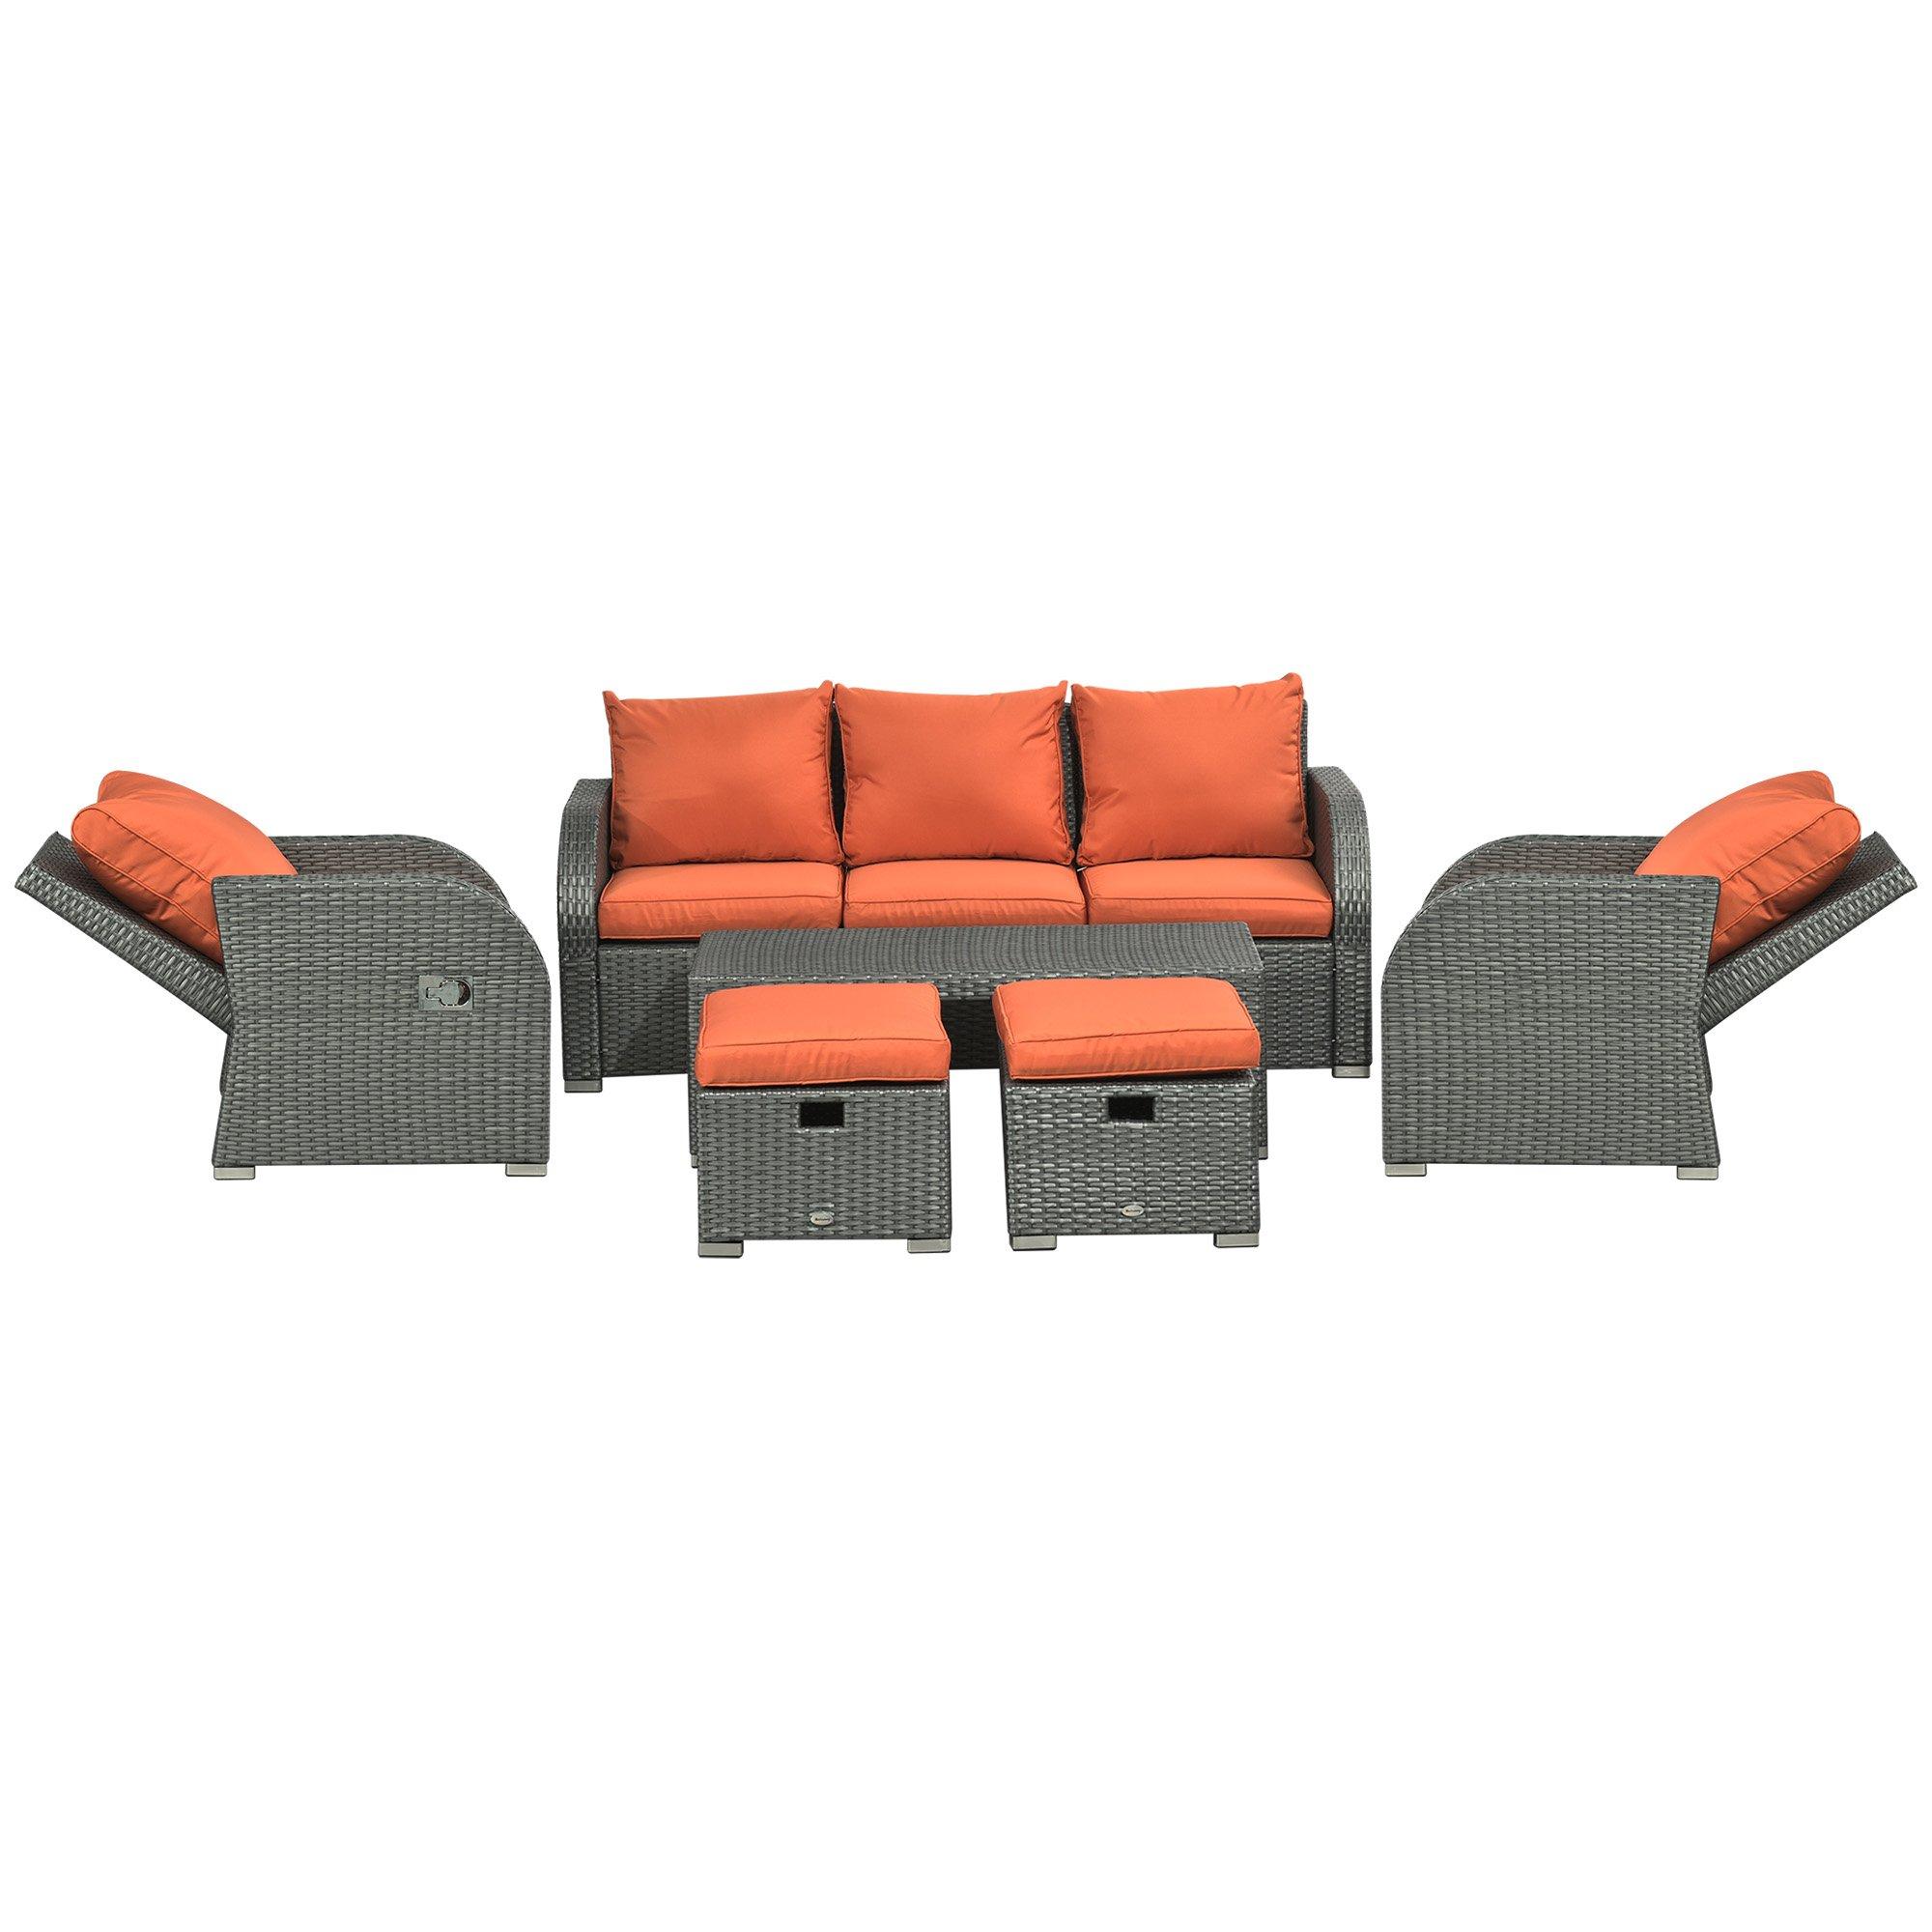 6pc Cushioned Outdoor Rattan Wicker 3-Seat Sofa, Recliner, Footstool, Table Set